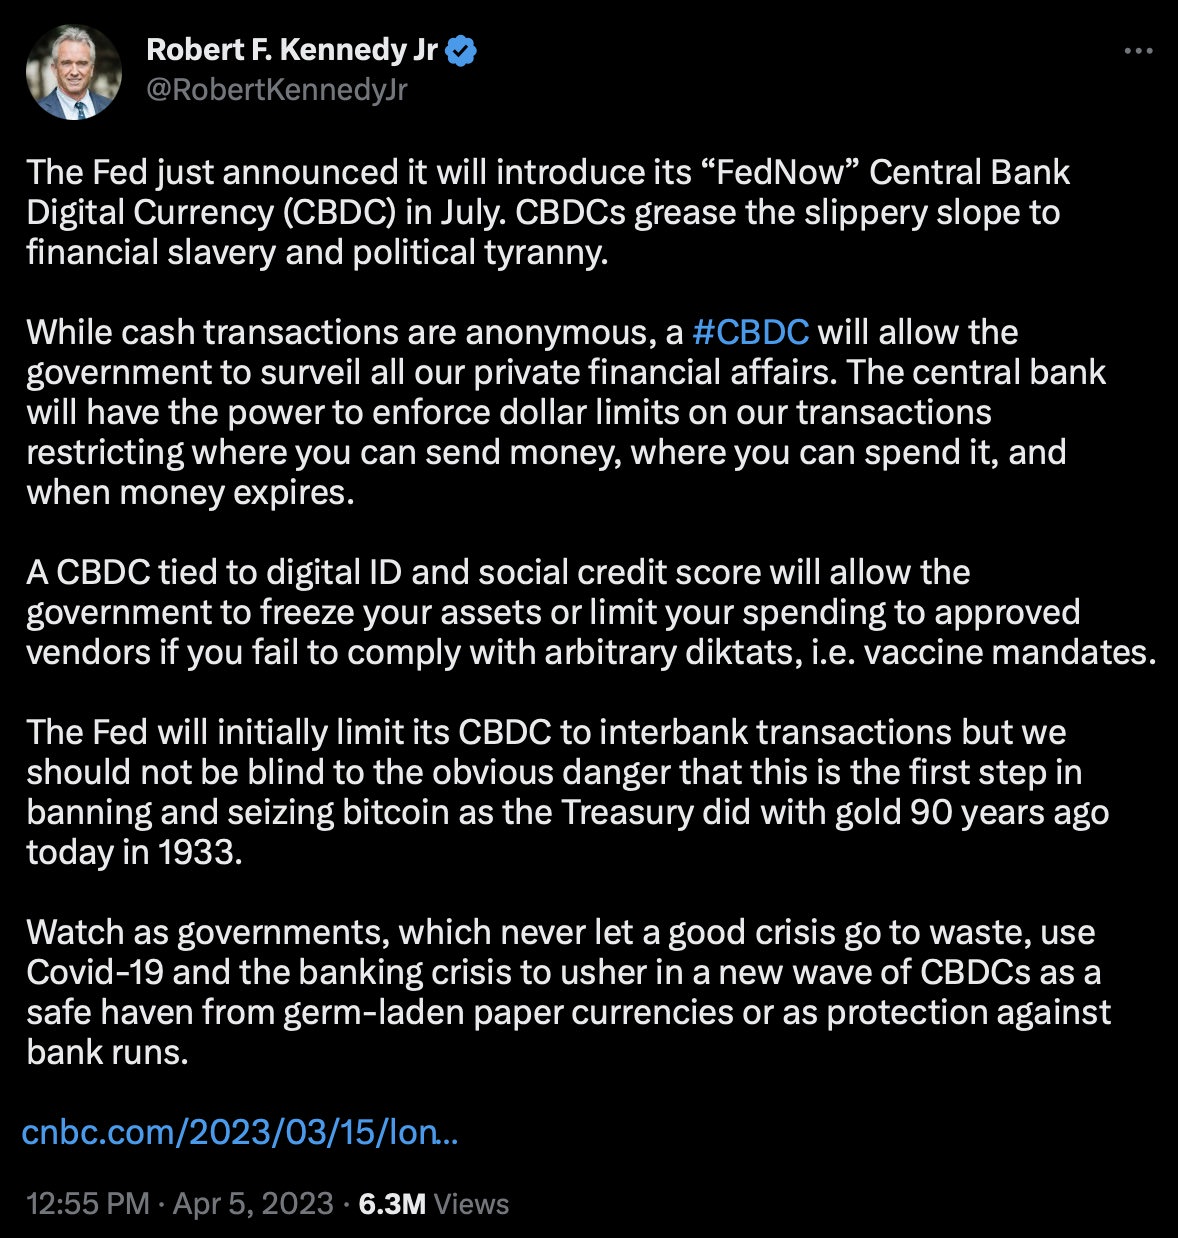 A post by Robert F. Kennedy, Jr. on Twitter, April 5, 2023.